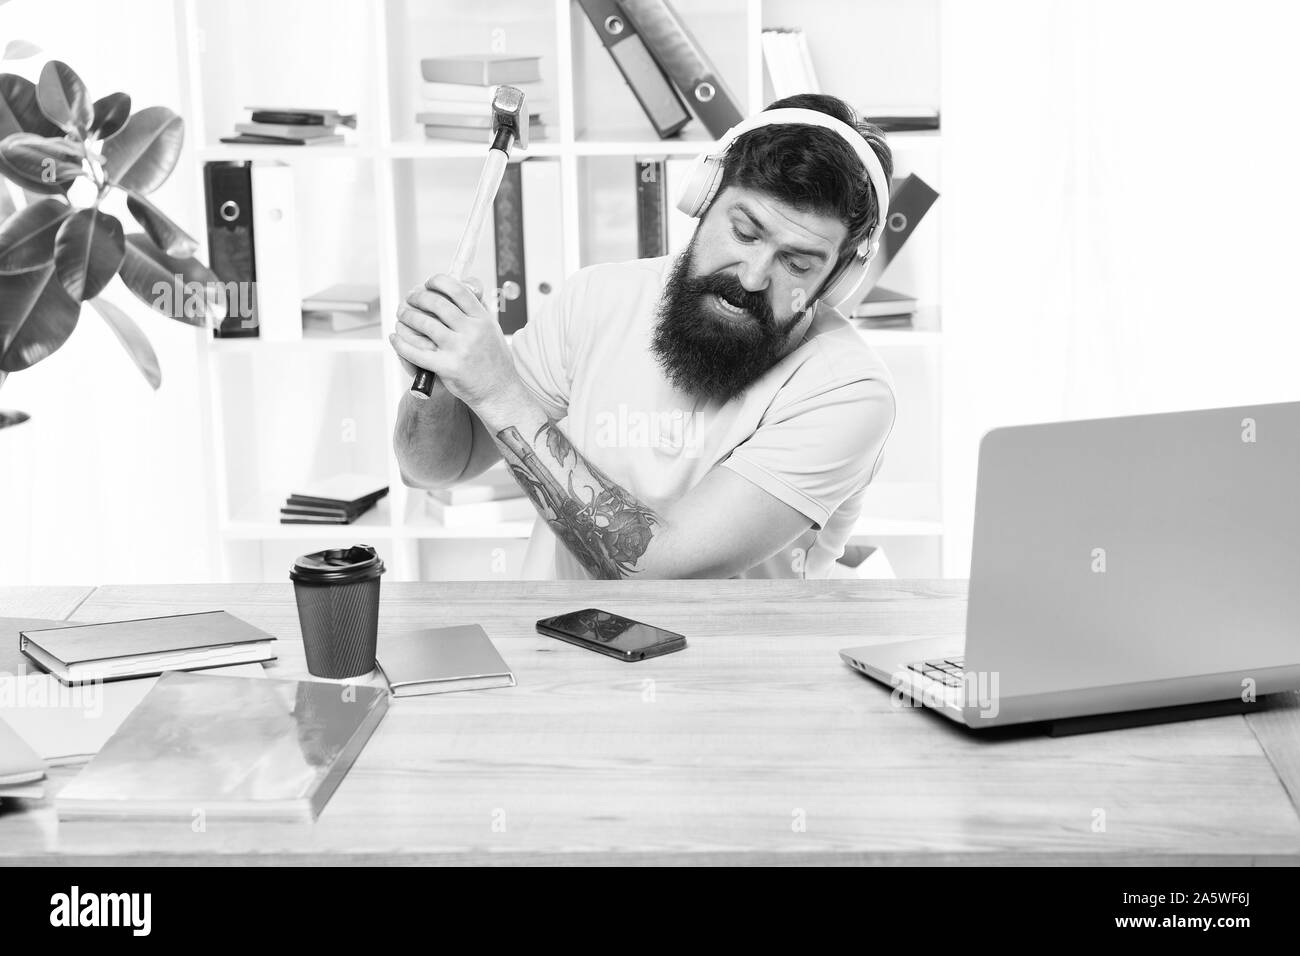 Failed mobile negotiations. Most annoying thing about work in call center. Incoming call. Annoying client calling. Man bearded guy headphones office swing hammer on smartphone. Spoiled communication. Stock Photo